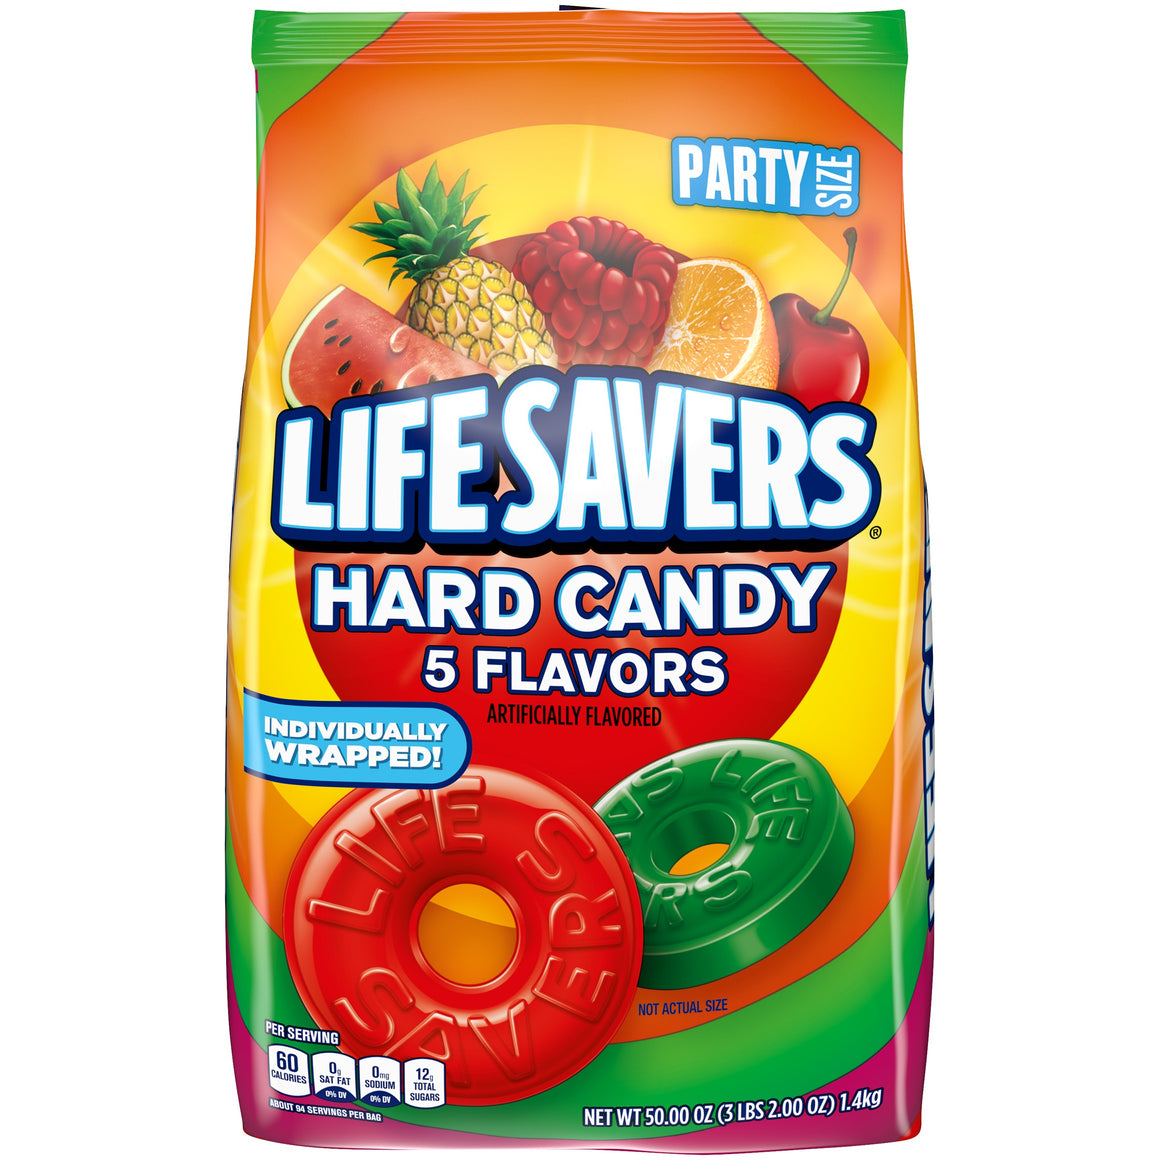 All City Candy Life Savers Hard Candy 5 Flavors Party Size - 50-oz. Bulk Bag Bulk Wrapped Wrigley For fresh candy and great service, visit www.allcitycandy.com